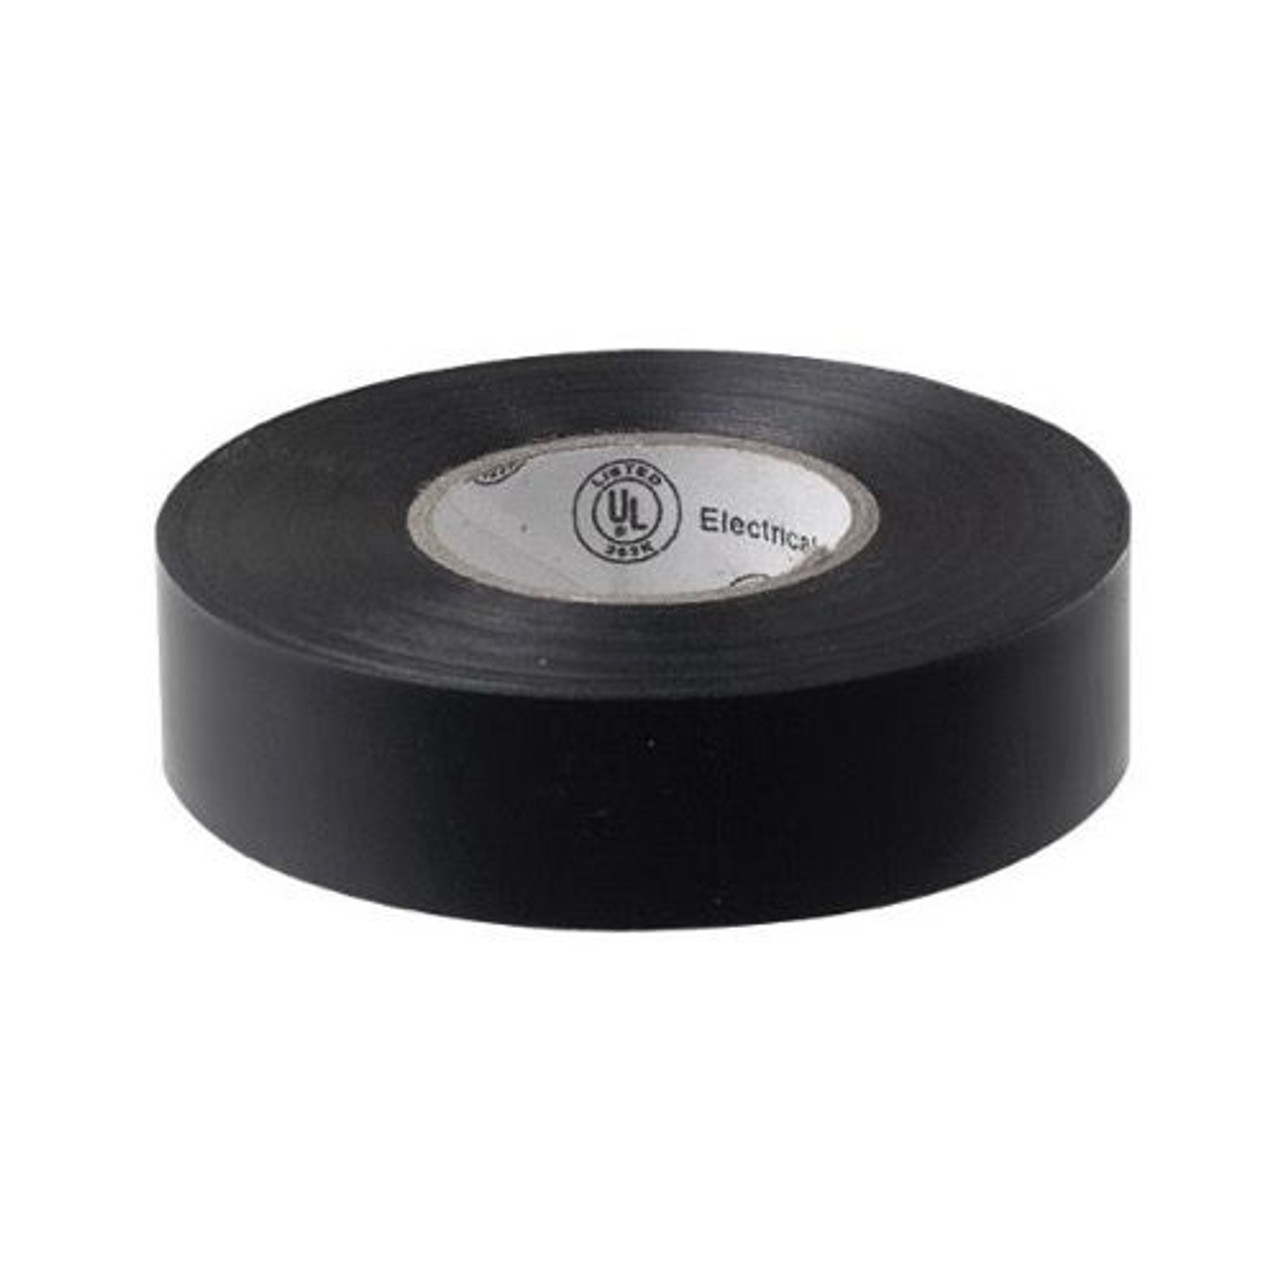 Eagle Electrical Tape Insulation 3/4" Inch 60' FT Heavy Duty Contractors Grade 3/4" x 60', Suitable for Use Up To 600V, 7 MIL, UL Approved, Black